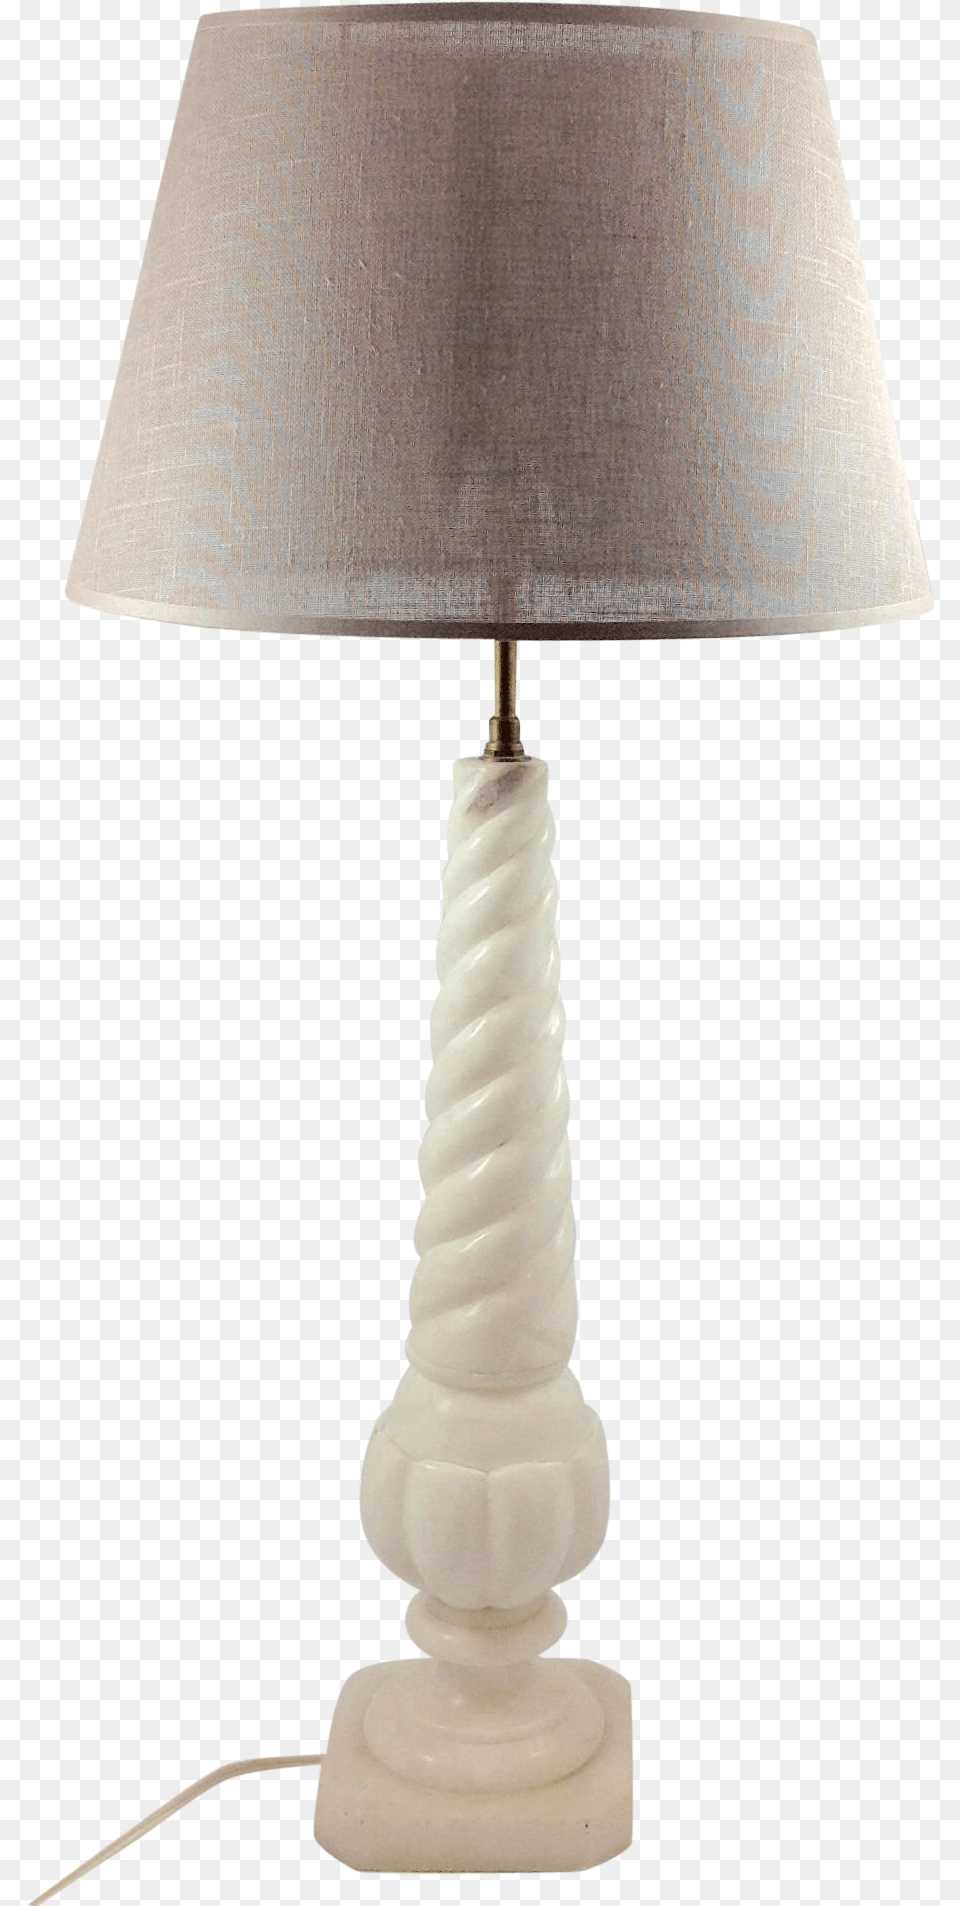 Vintage Swirl Lampshade, Lamp, Table Lamp Free Transparent Png